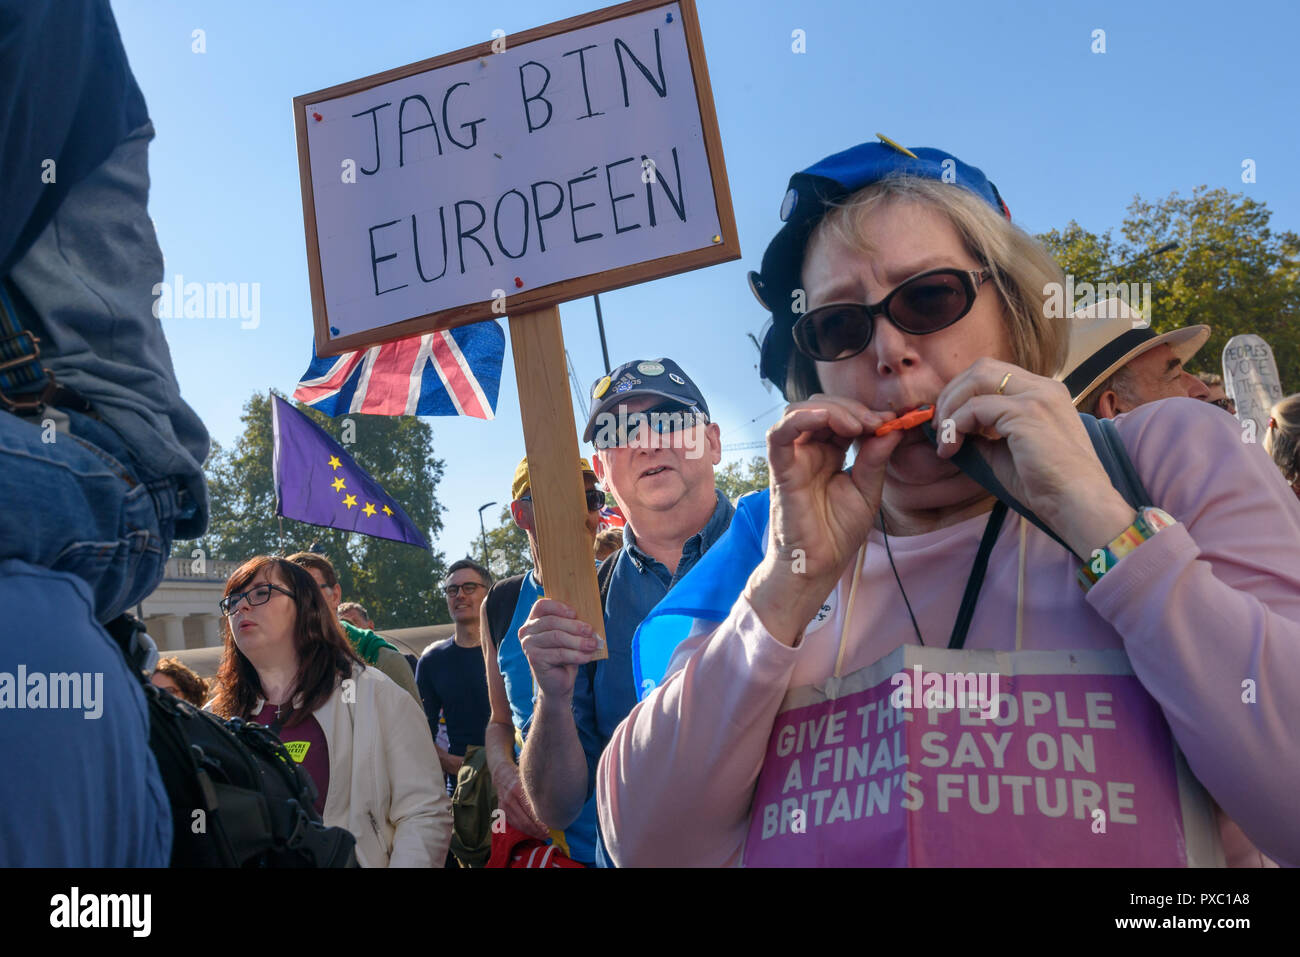 London, UK. 20th October 2018. People with placards, banners and flags on the People's Vote March calling for a vote to give the final say on the Brexit deal or failure to get a deal as the march leaves Hyde Park Corner. They say the new evidence which has come out since the referendum makes it essential to get a new mandate from the people to leave the EU. Peter Marshall/Alamy Live News Stock Photo